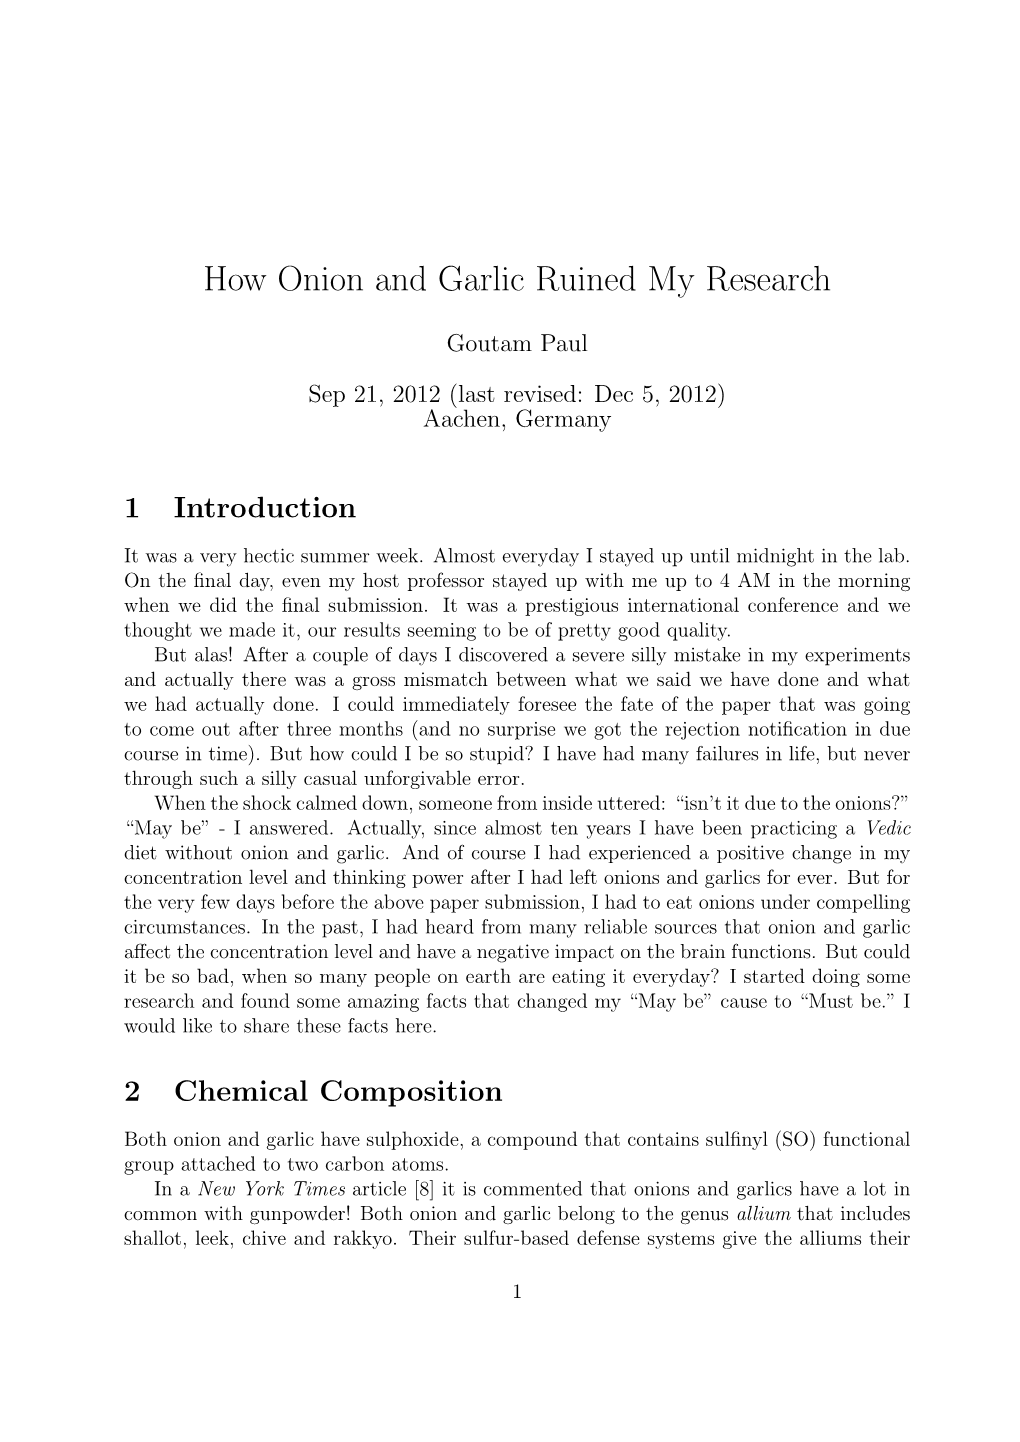 How Onion and Garlic Ruined My Research